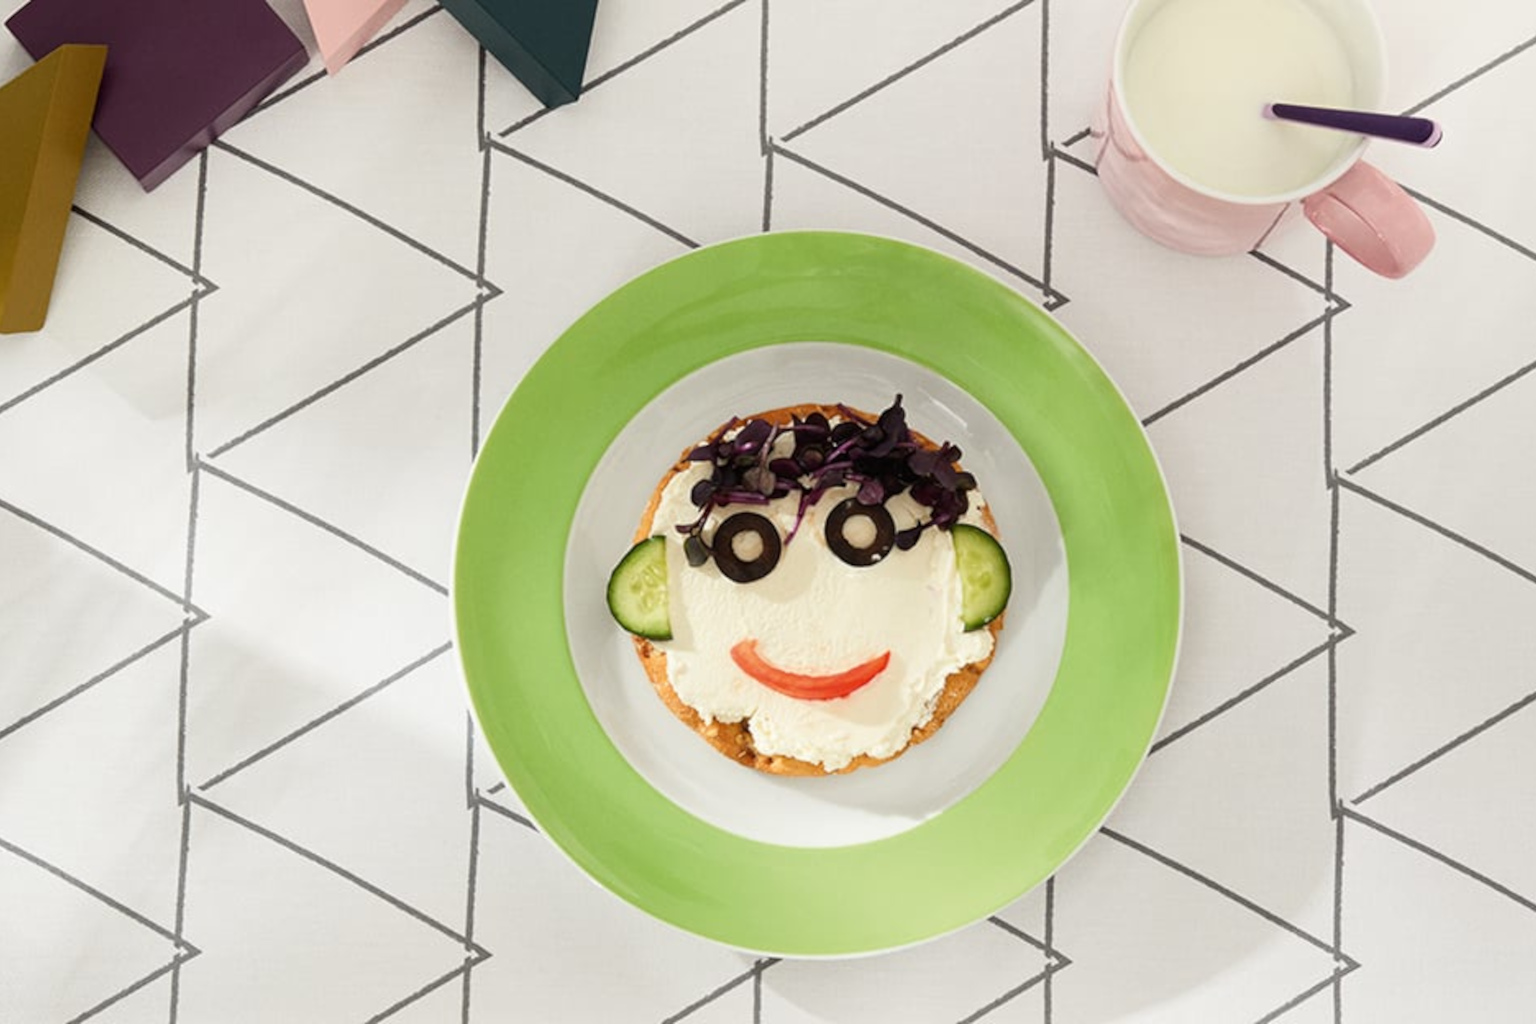 Thomas Sunny Day Apple Green plate with funny face arranged of bread and vegetables